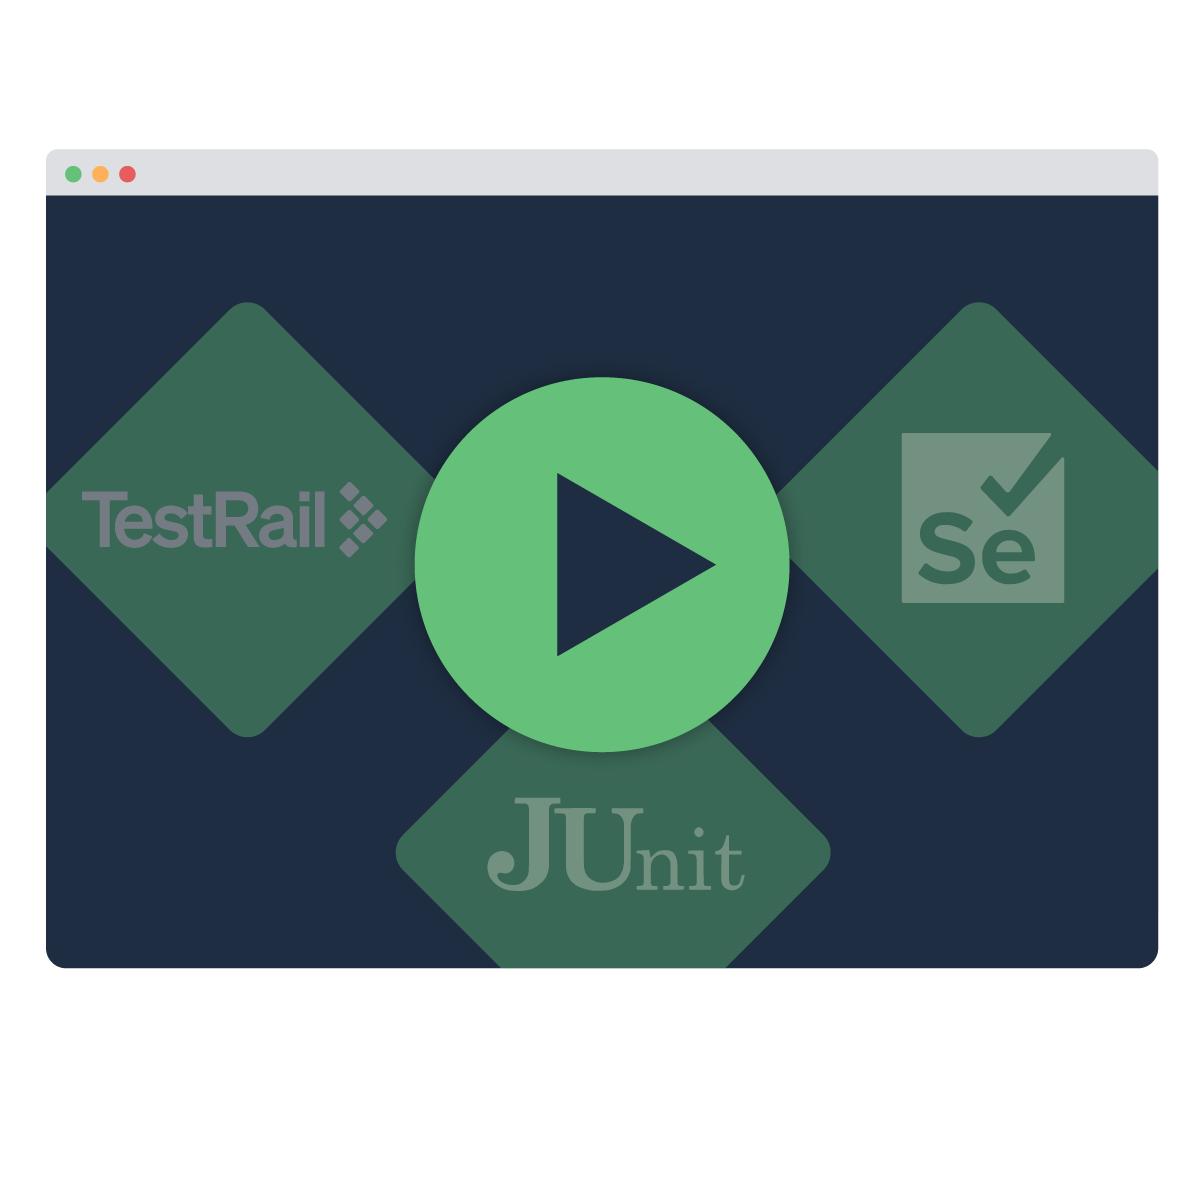 How to integrate TestRail with JUnit and Selenium